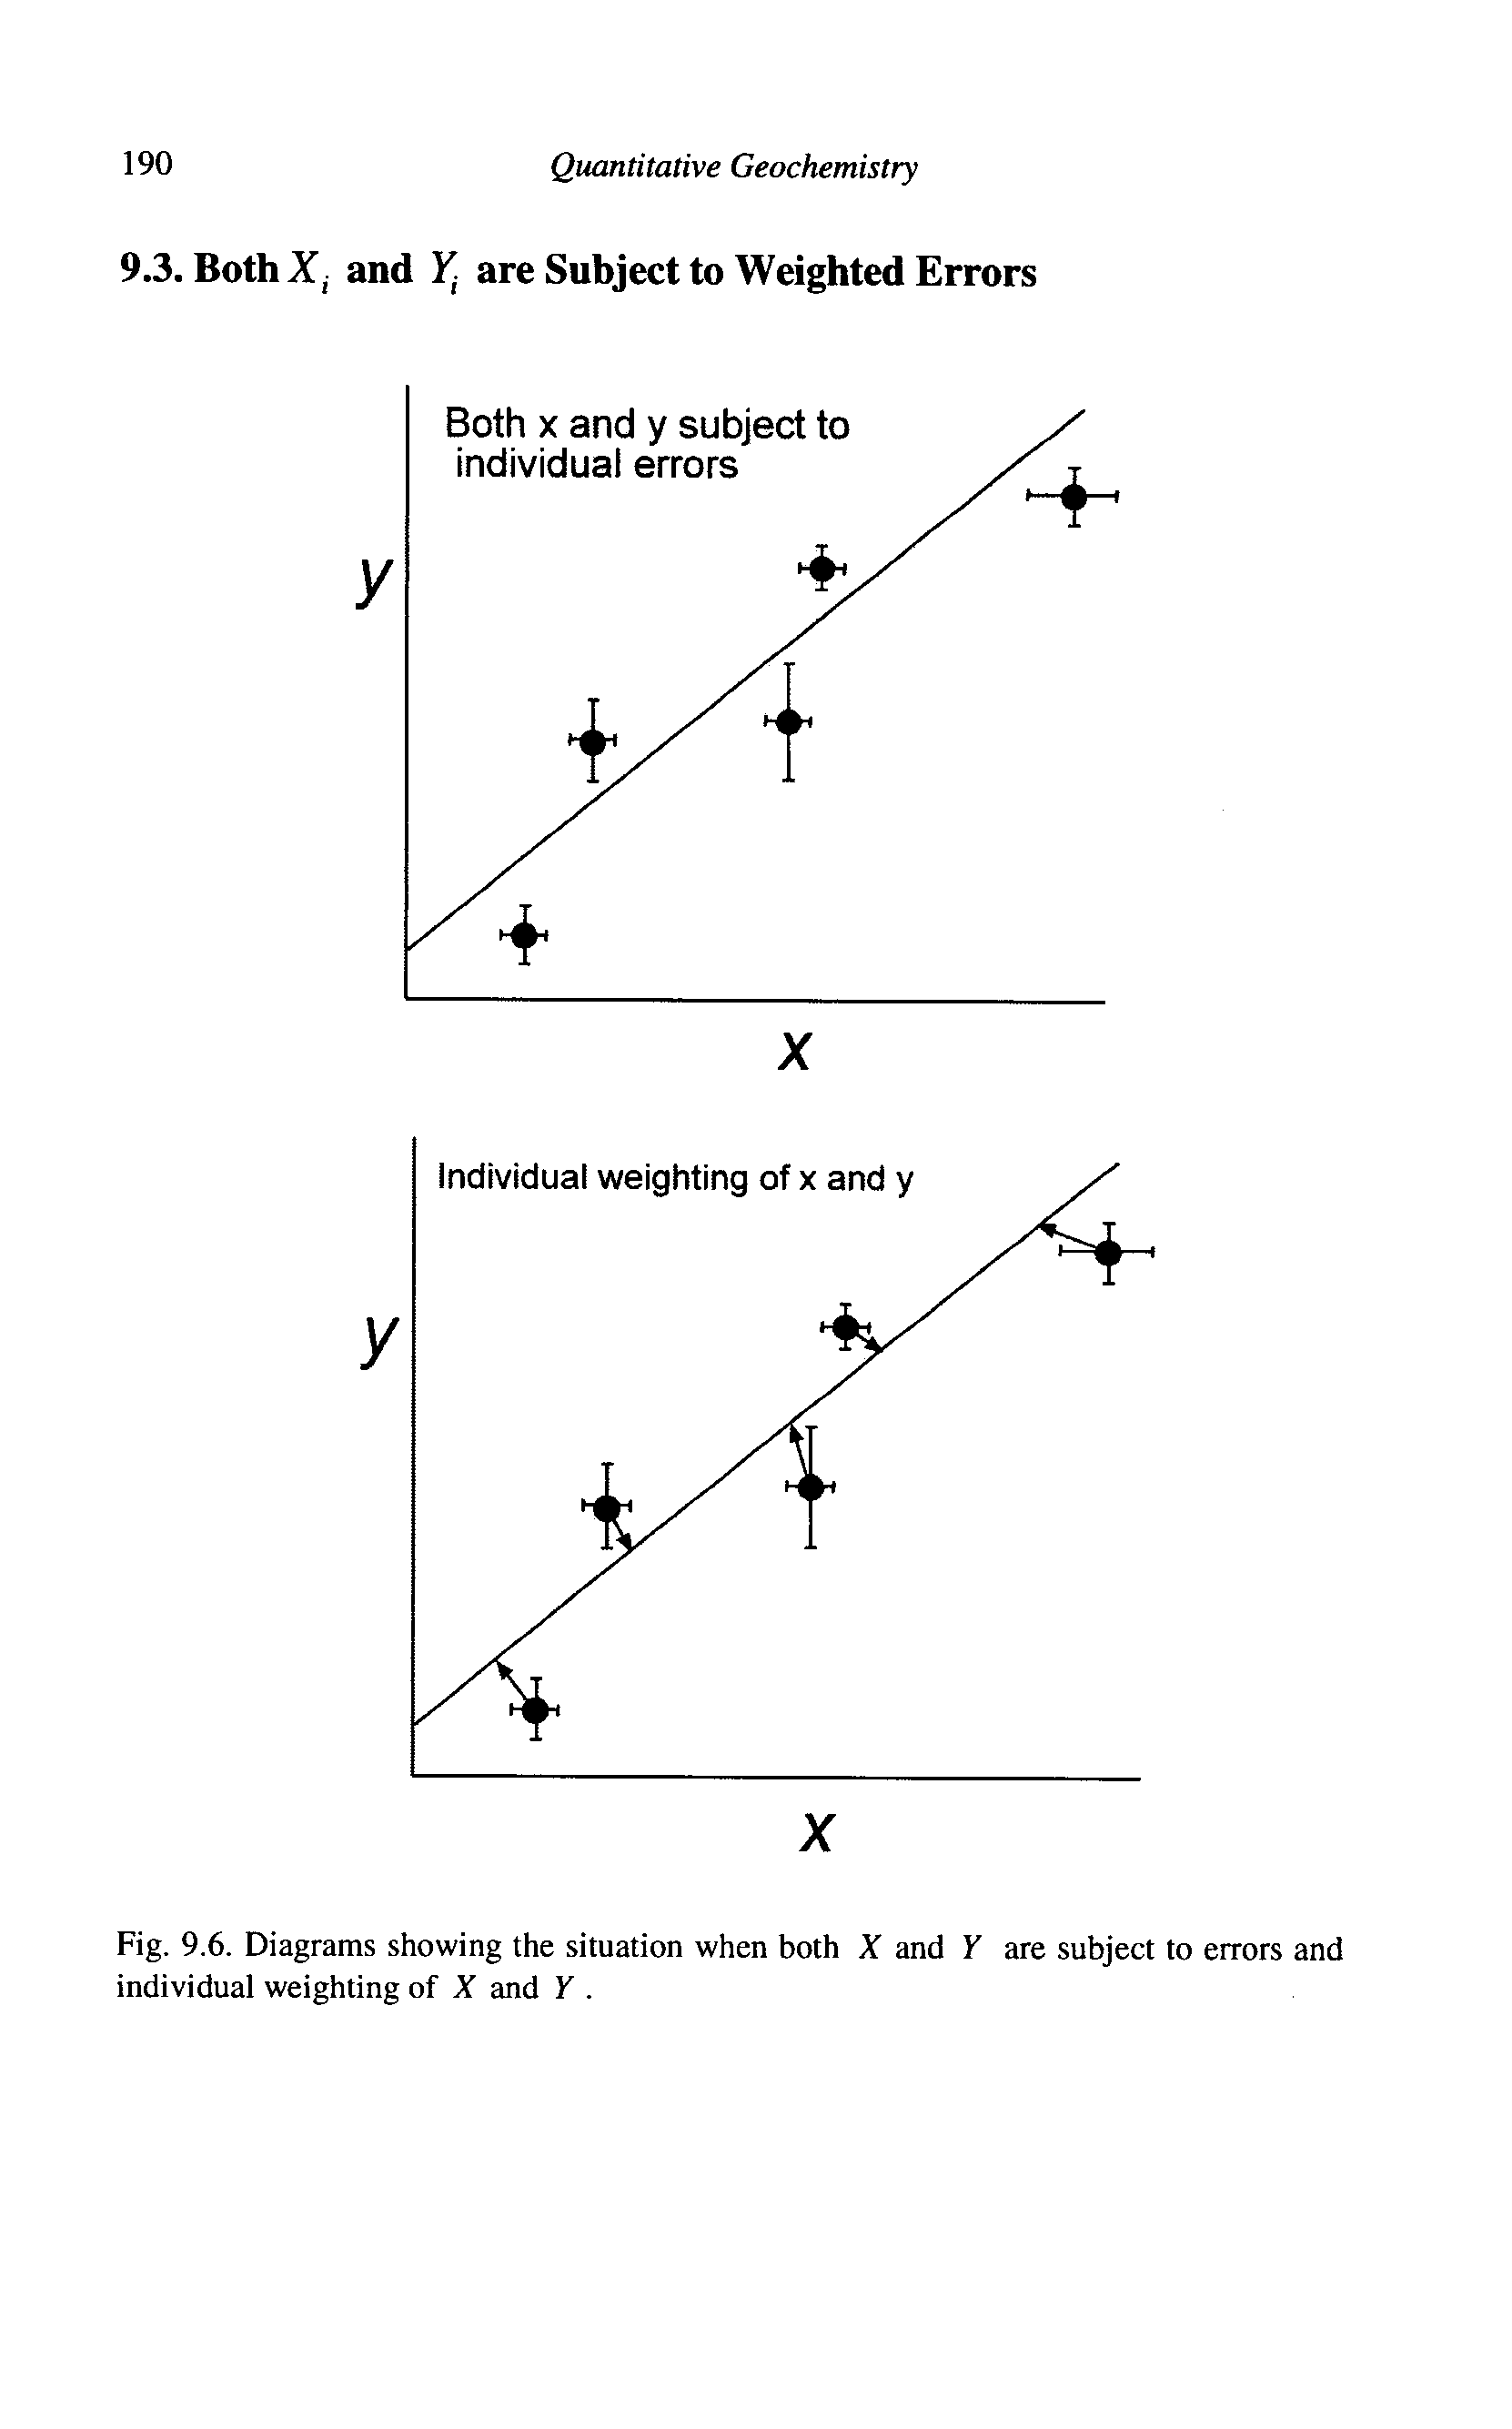 Fig. 9.6. Diagrams showing the situation when both X and Y are subject to errors and individual weighting of X and Y. ...